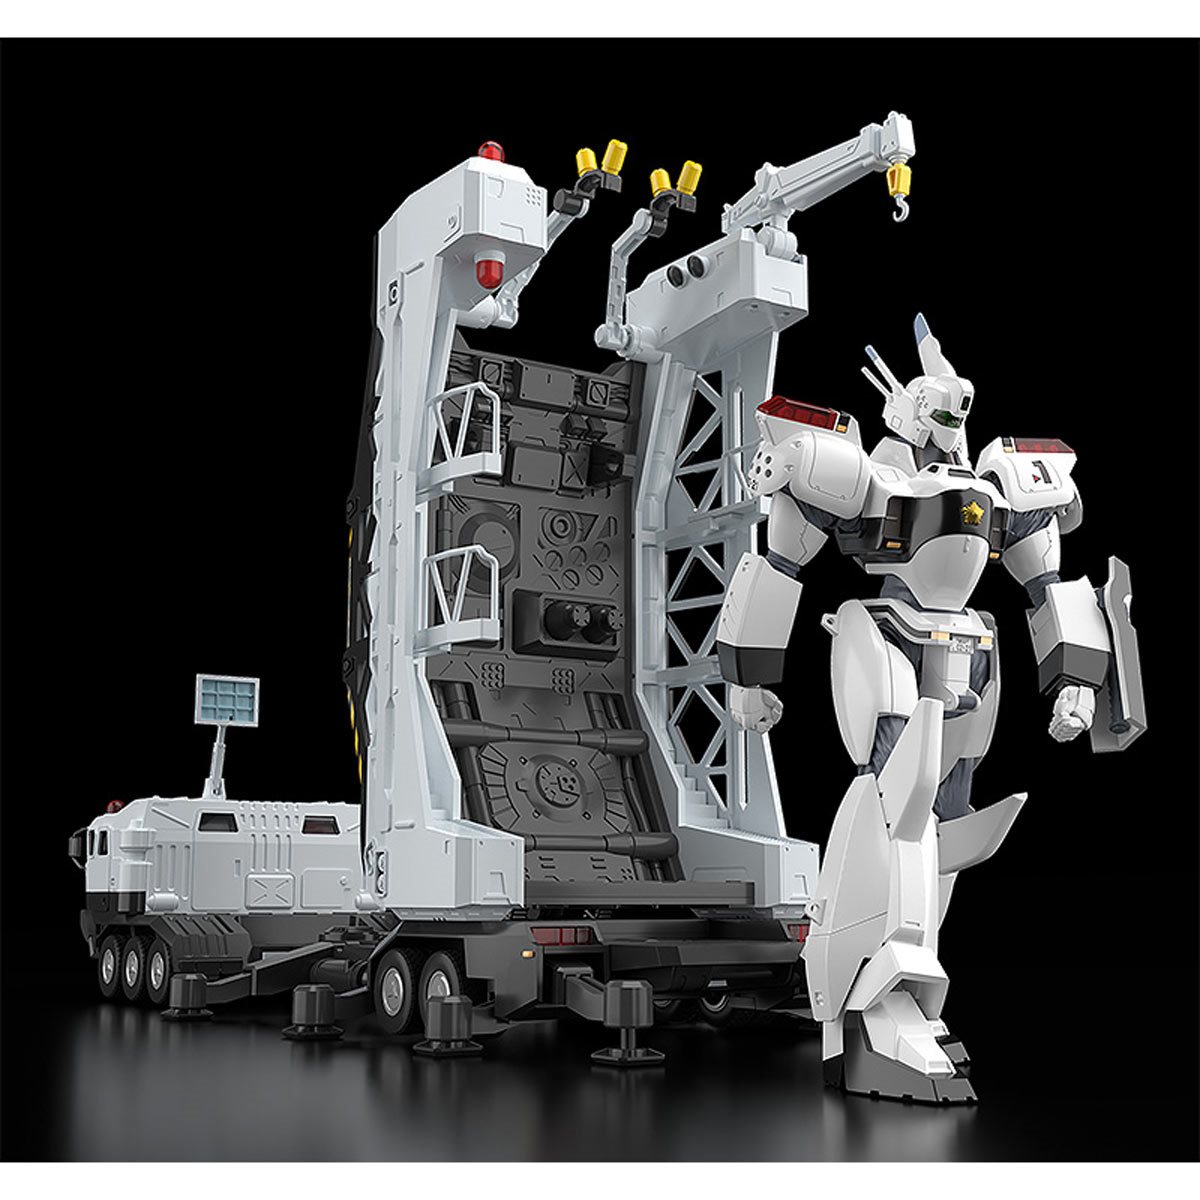 Patlabor Type 98 Command Vehicle and Type 99 Special Labor Carrier 